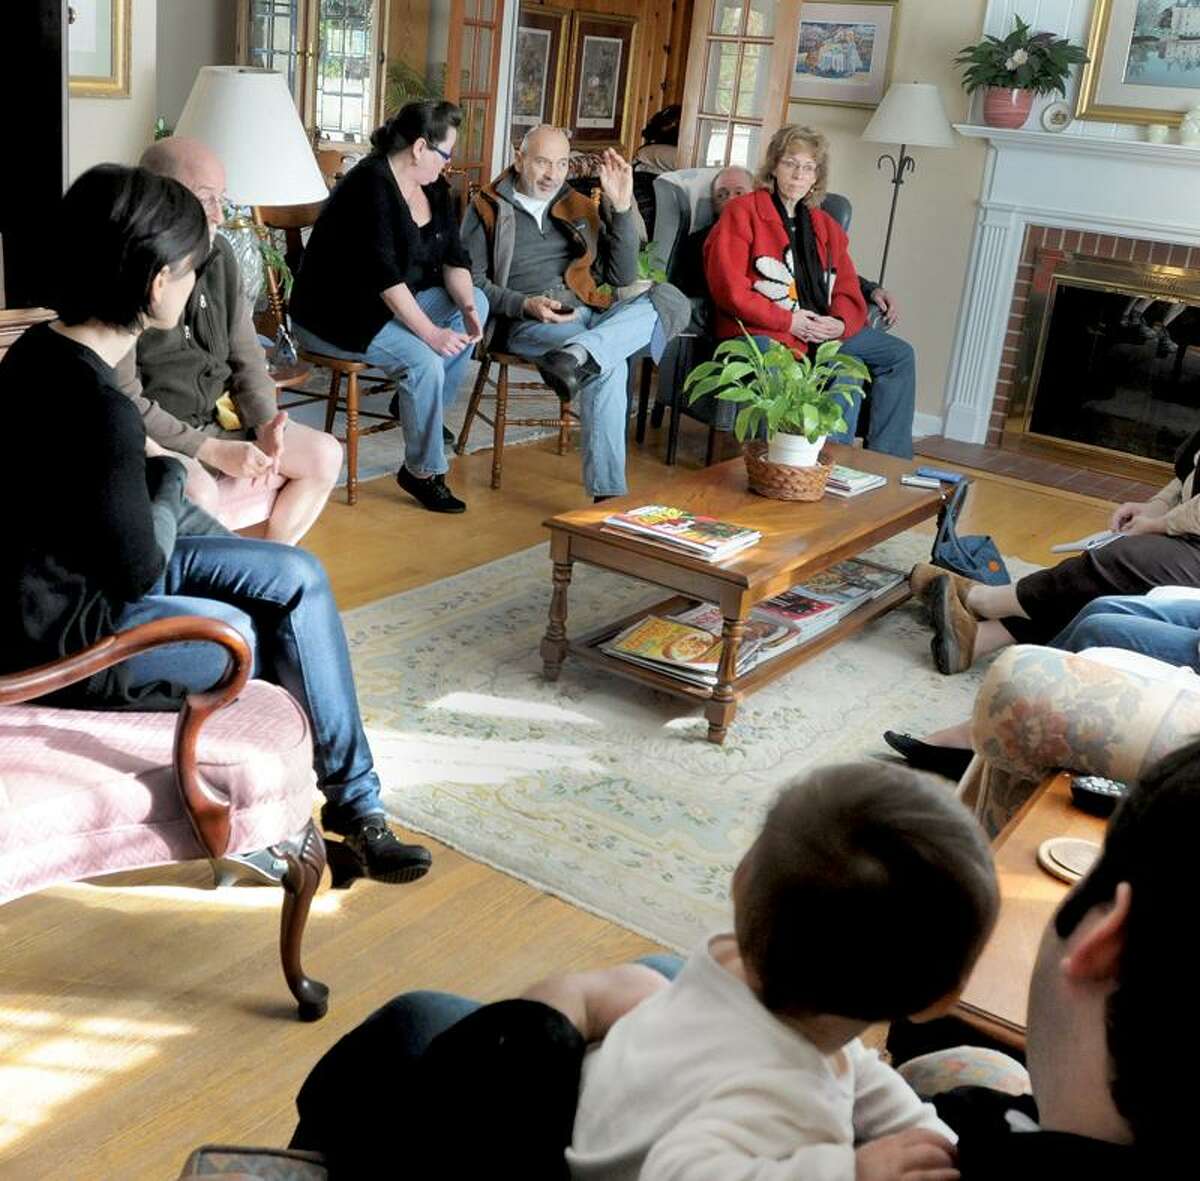 Residents who live in the Austen Road area discuss the bad behavior and public distrubances of some Quinnipiac University students living off campus and on and around their streets. Clockwise from bottom right are: Eliad Laskin with his daughter Maya Laskin, 1, Deb Flonc, John Moynihan, Lynn Mudry, David Kiljanowicz, Dick and Sherry Craft. Peter Hvizdak / Register November 19, 2011 ph2412 Connecticut